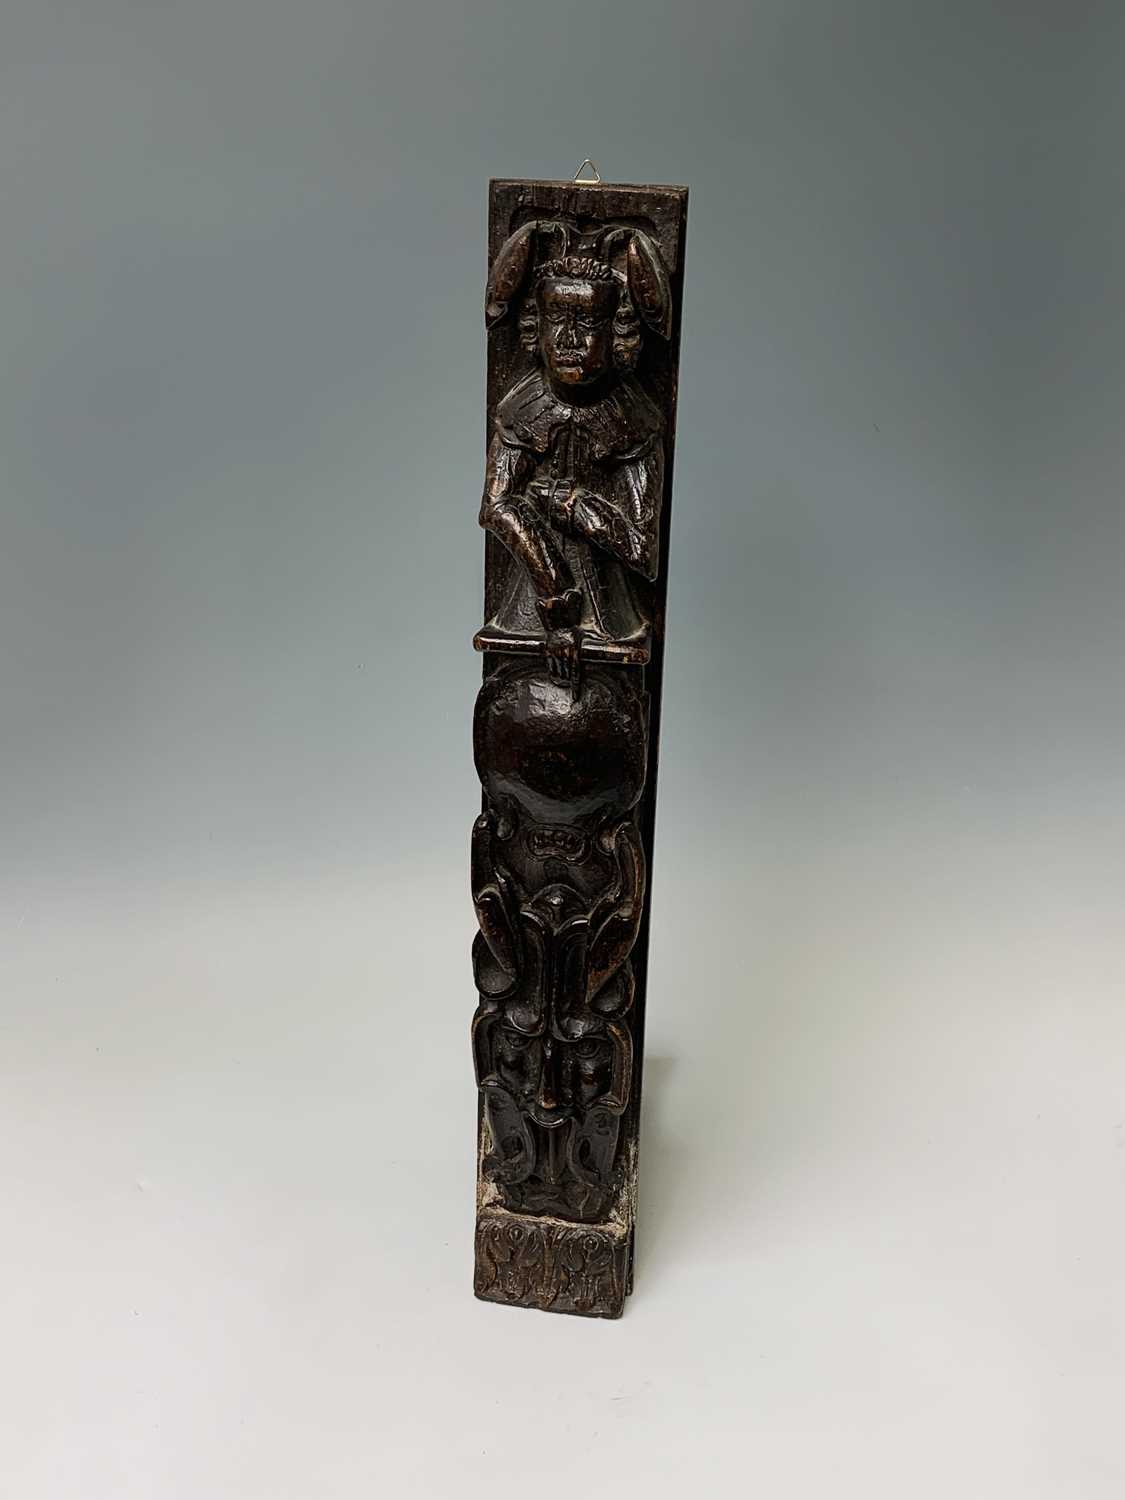 An oak carved oak term panel, 16th century, depicting a male figure rising above a vacant